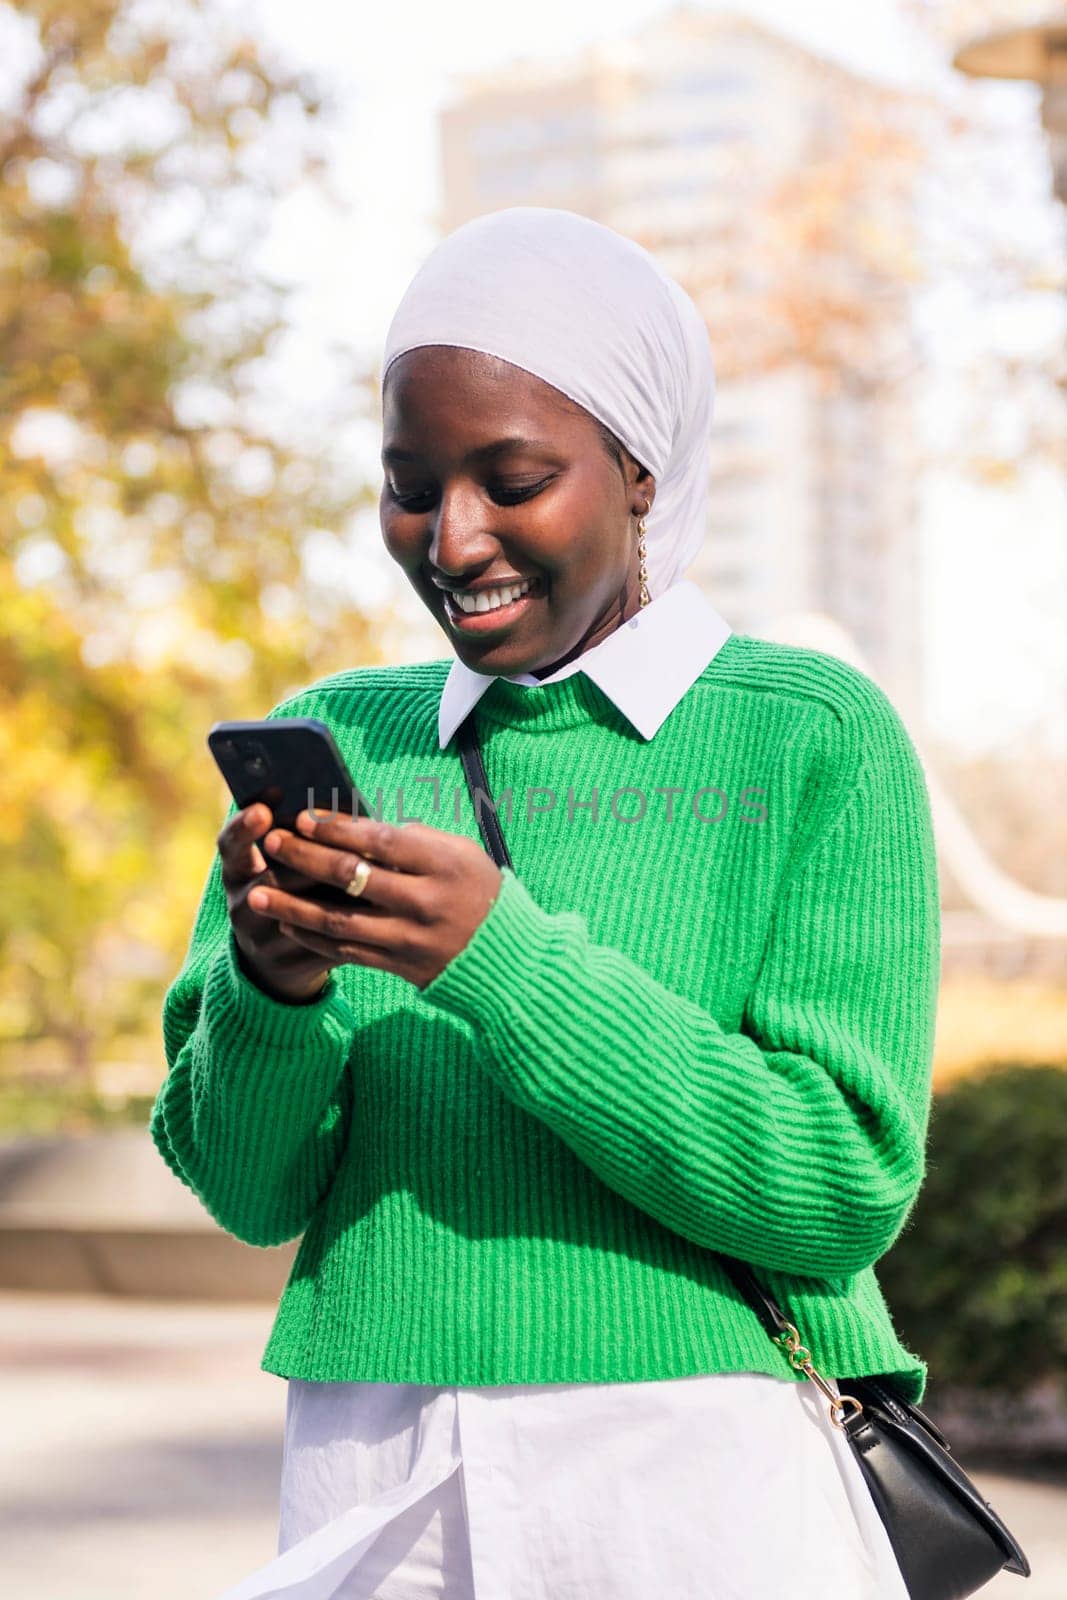 muslim black woman smiling happy using her mobile phone, concept of technology and modern lifestyle